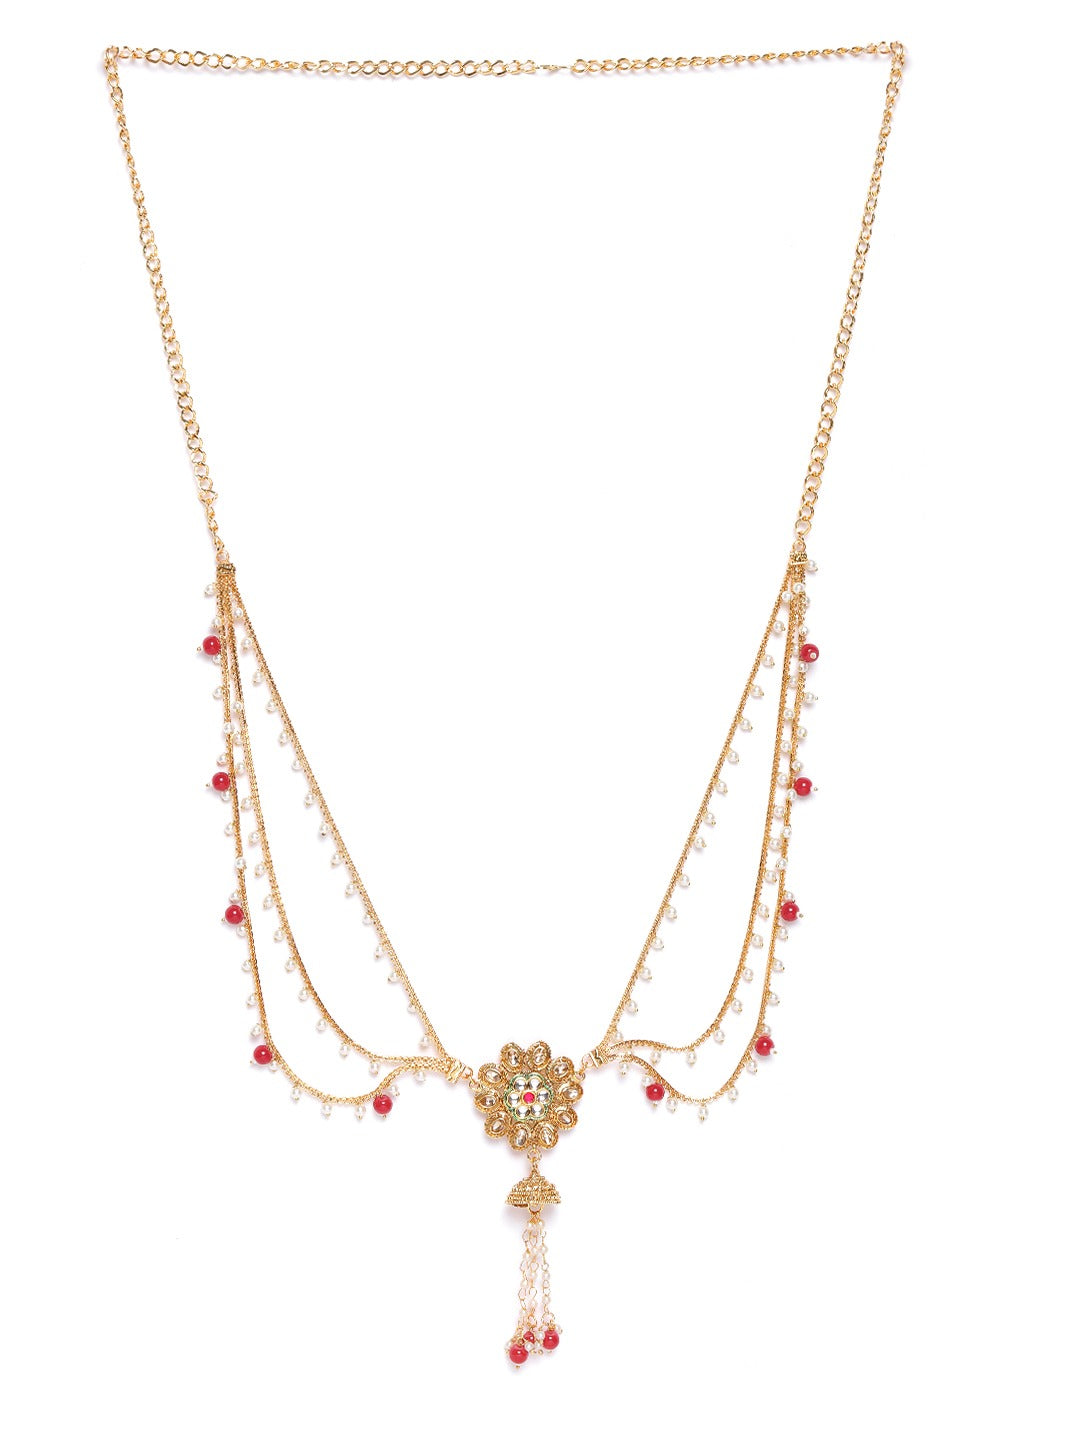 Off-White & Red Gold-Plated Kundan-Studded & Beaded Handcrafted Kamarbandh